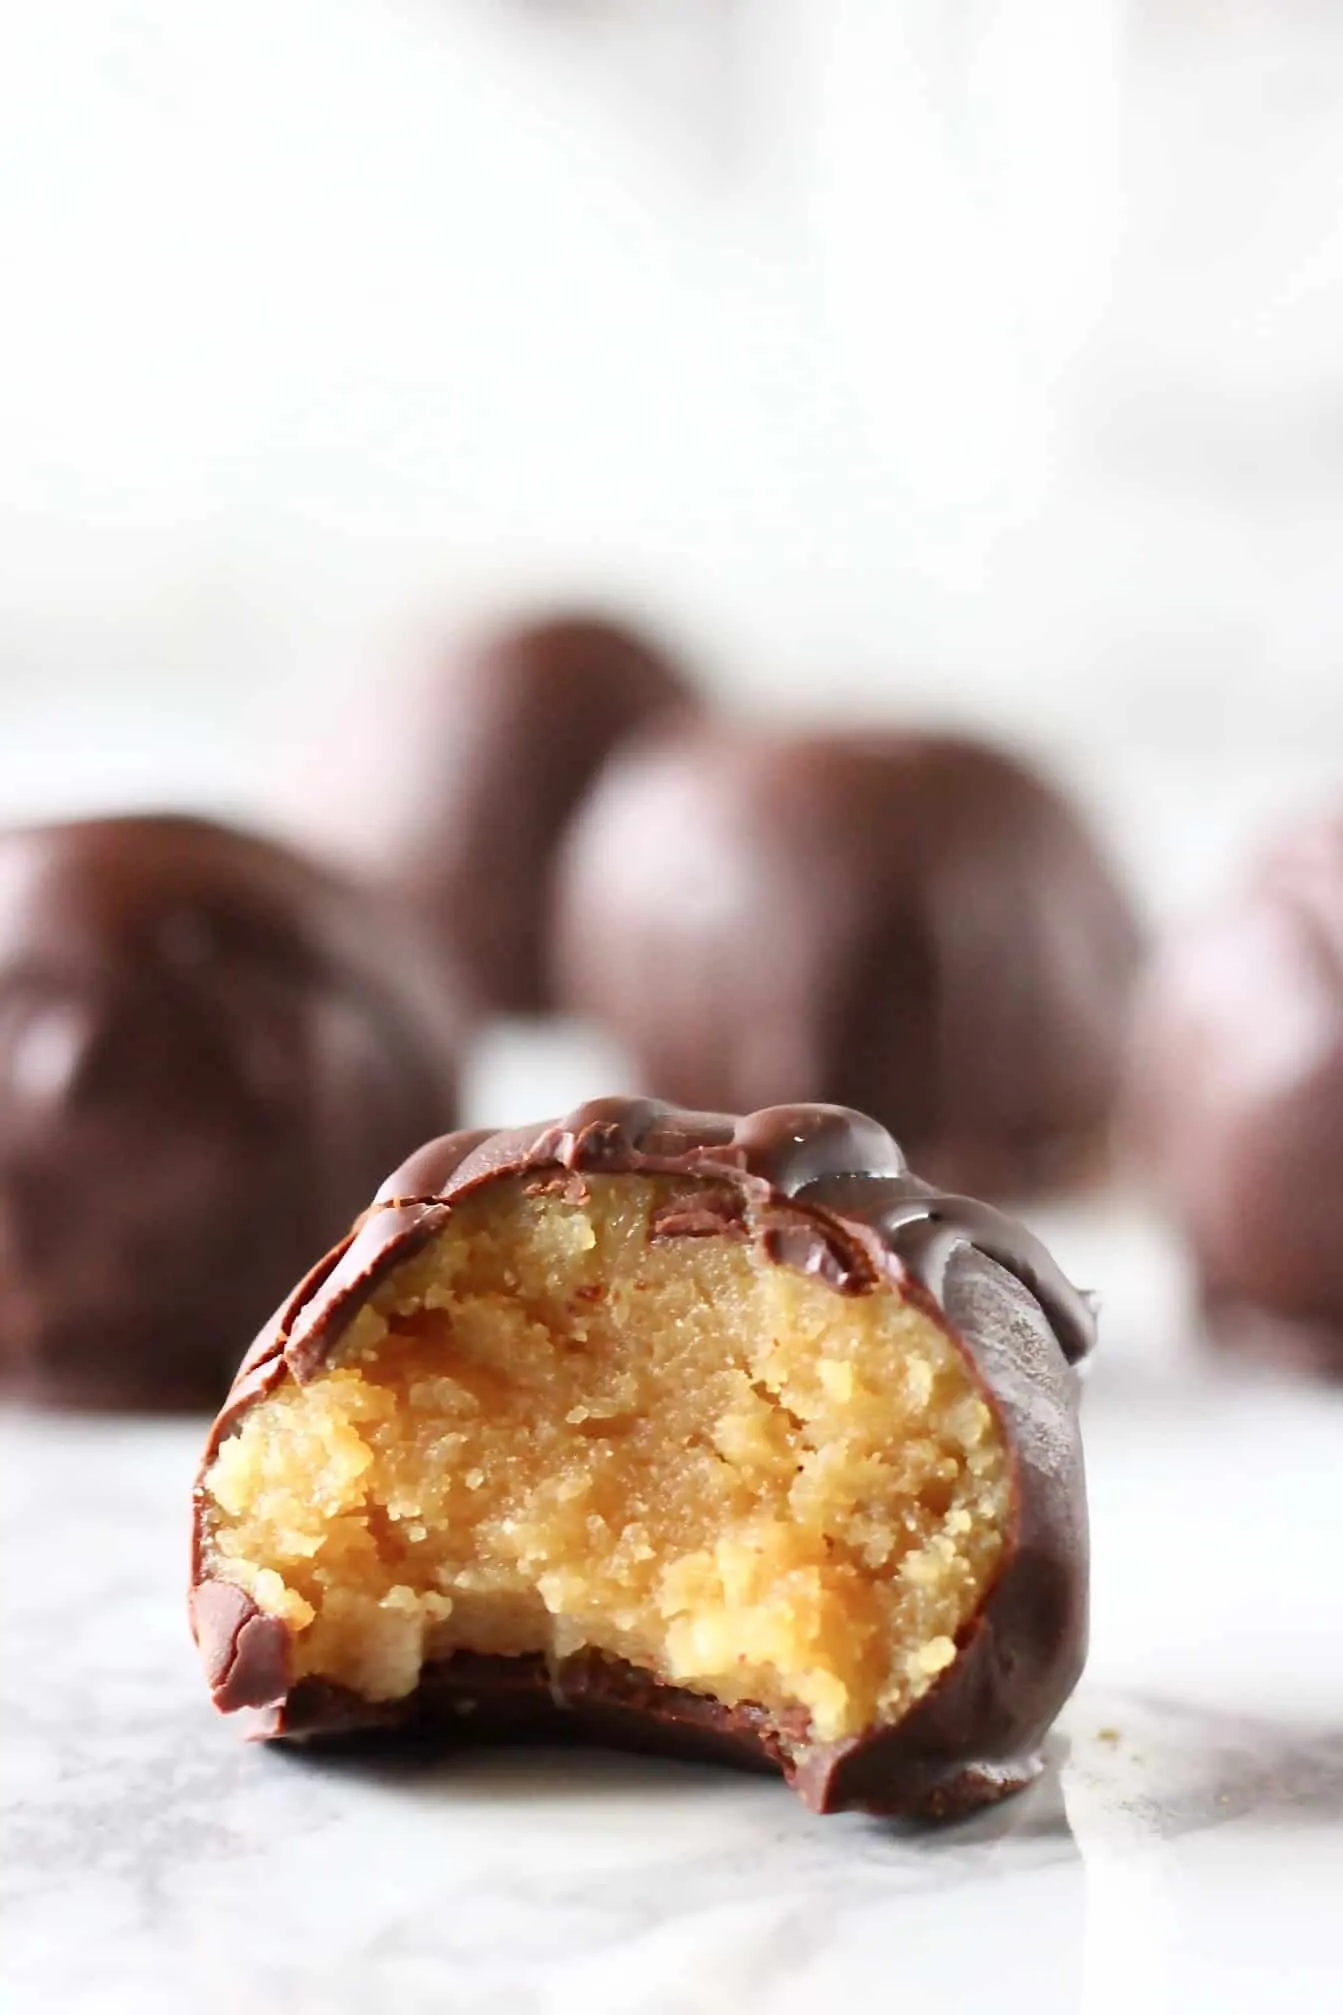 Chocolate-covered peanut butter balls with a bite taken out of one